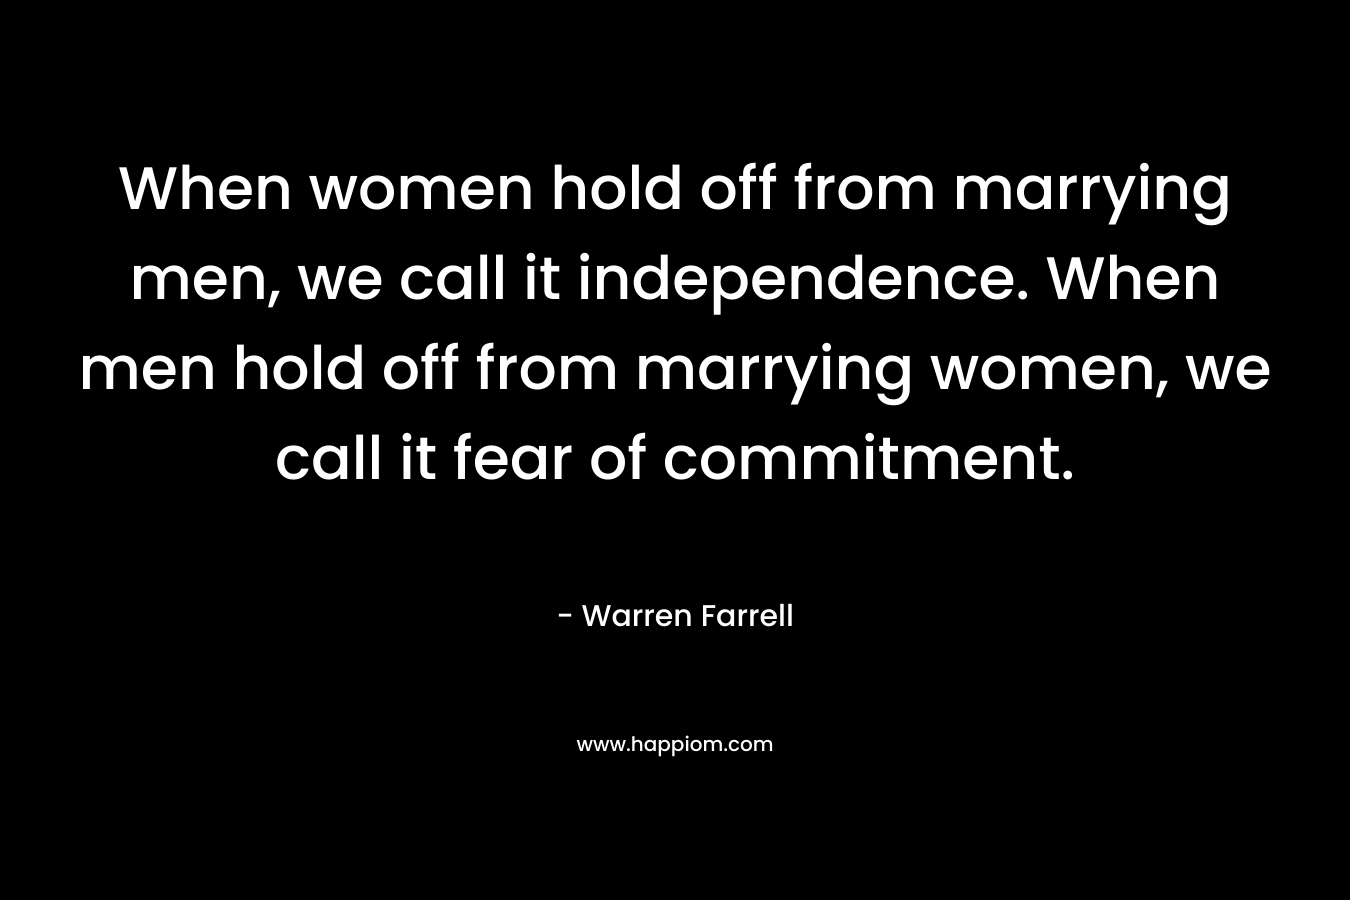 When women hold off from marrying men, we call it independence. When men hold off from marrying women, we call it fear of commitment. – Warren Farrell